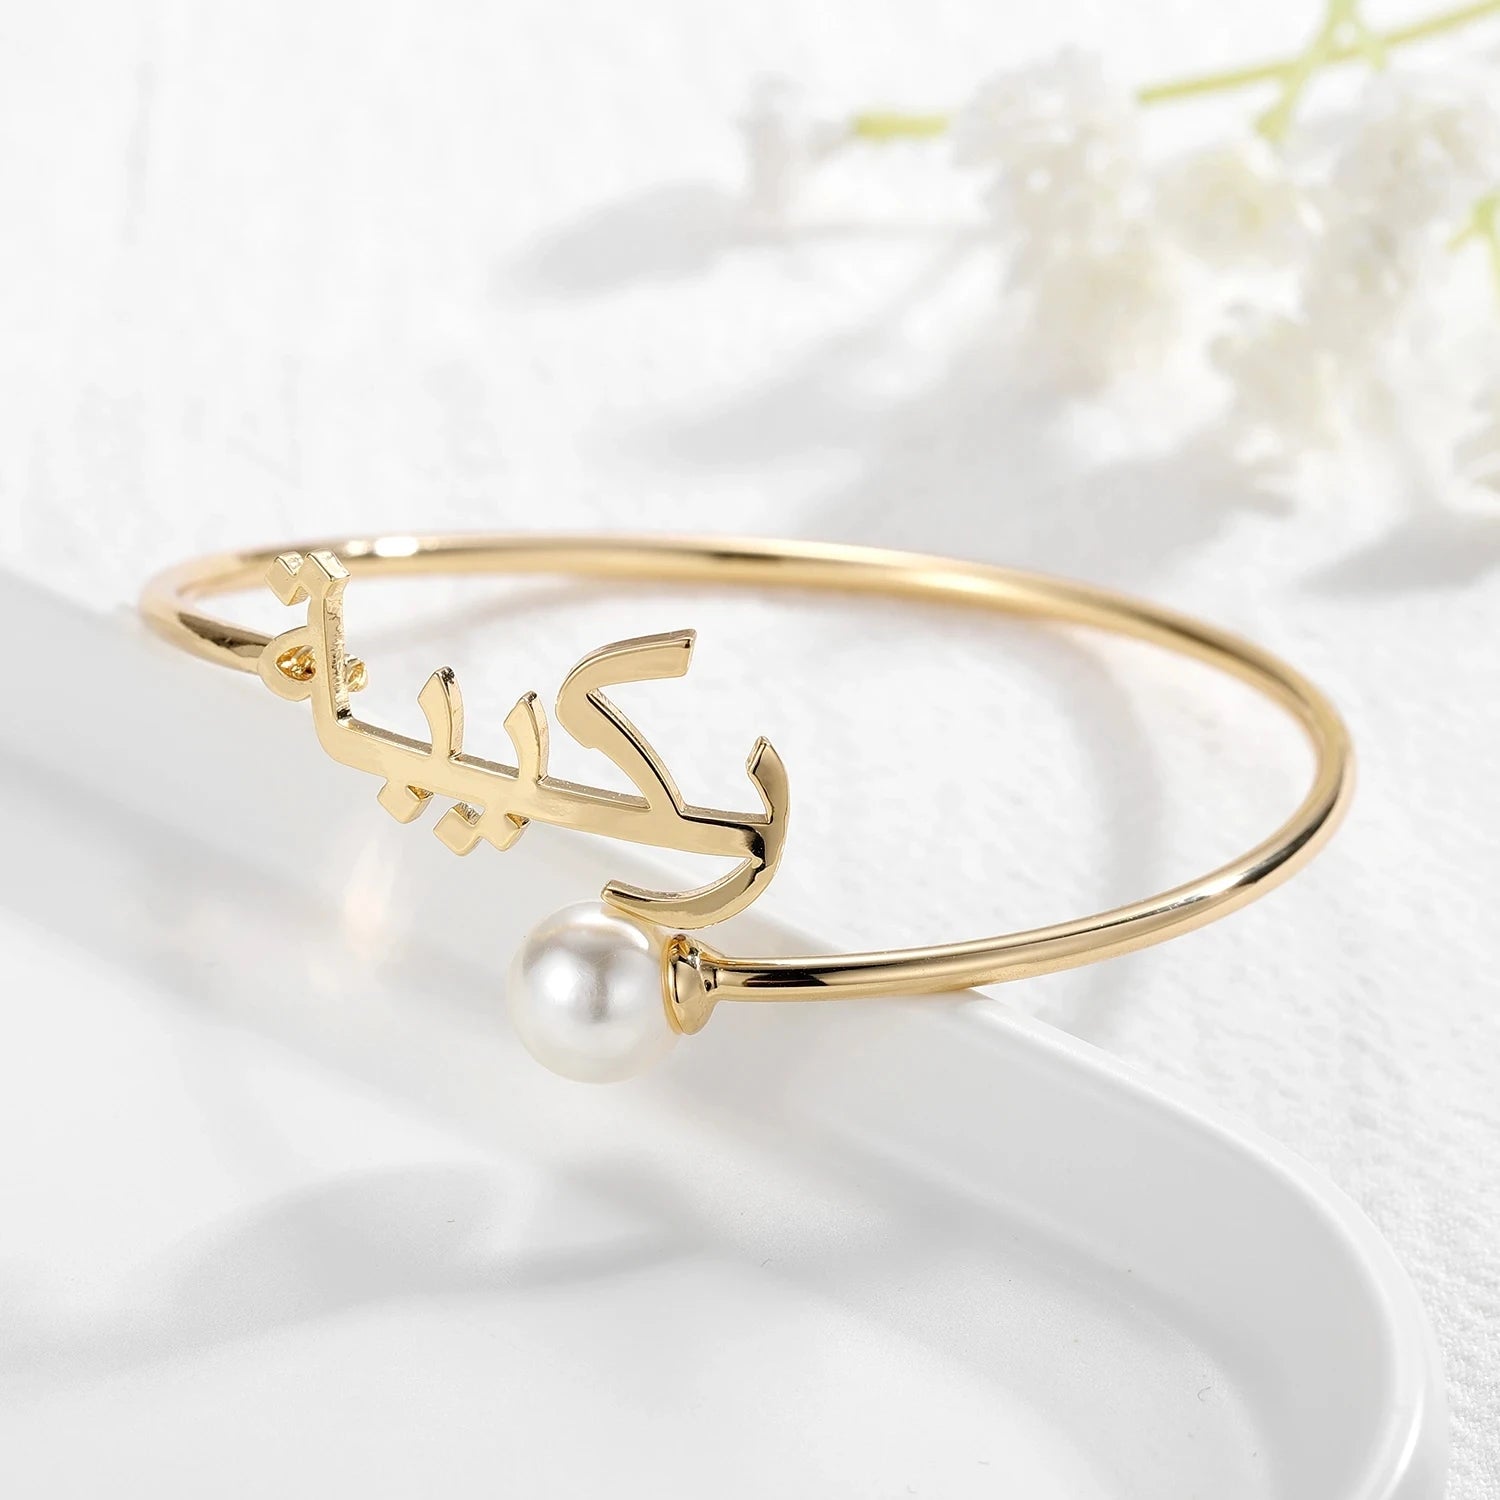 Arab Luxury Gold Plated Ethnic Bangles Bracelet And Ring Set Adjustable  Copper Jewelry For Women, Perfect For Weddings And Fashionable Events From  Andrewwiggins, $16.58 | DHgate.Com